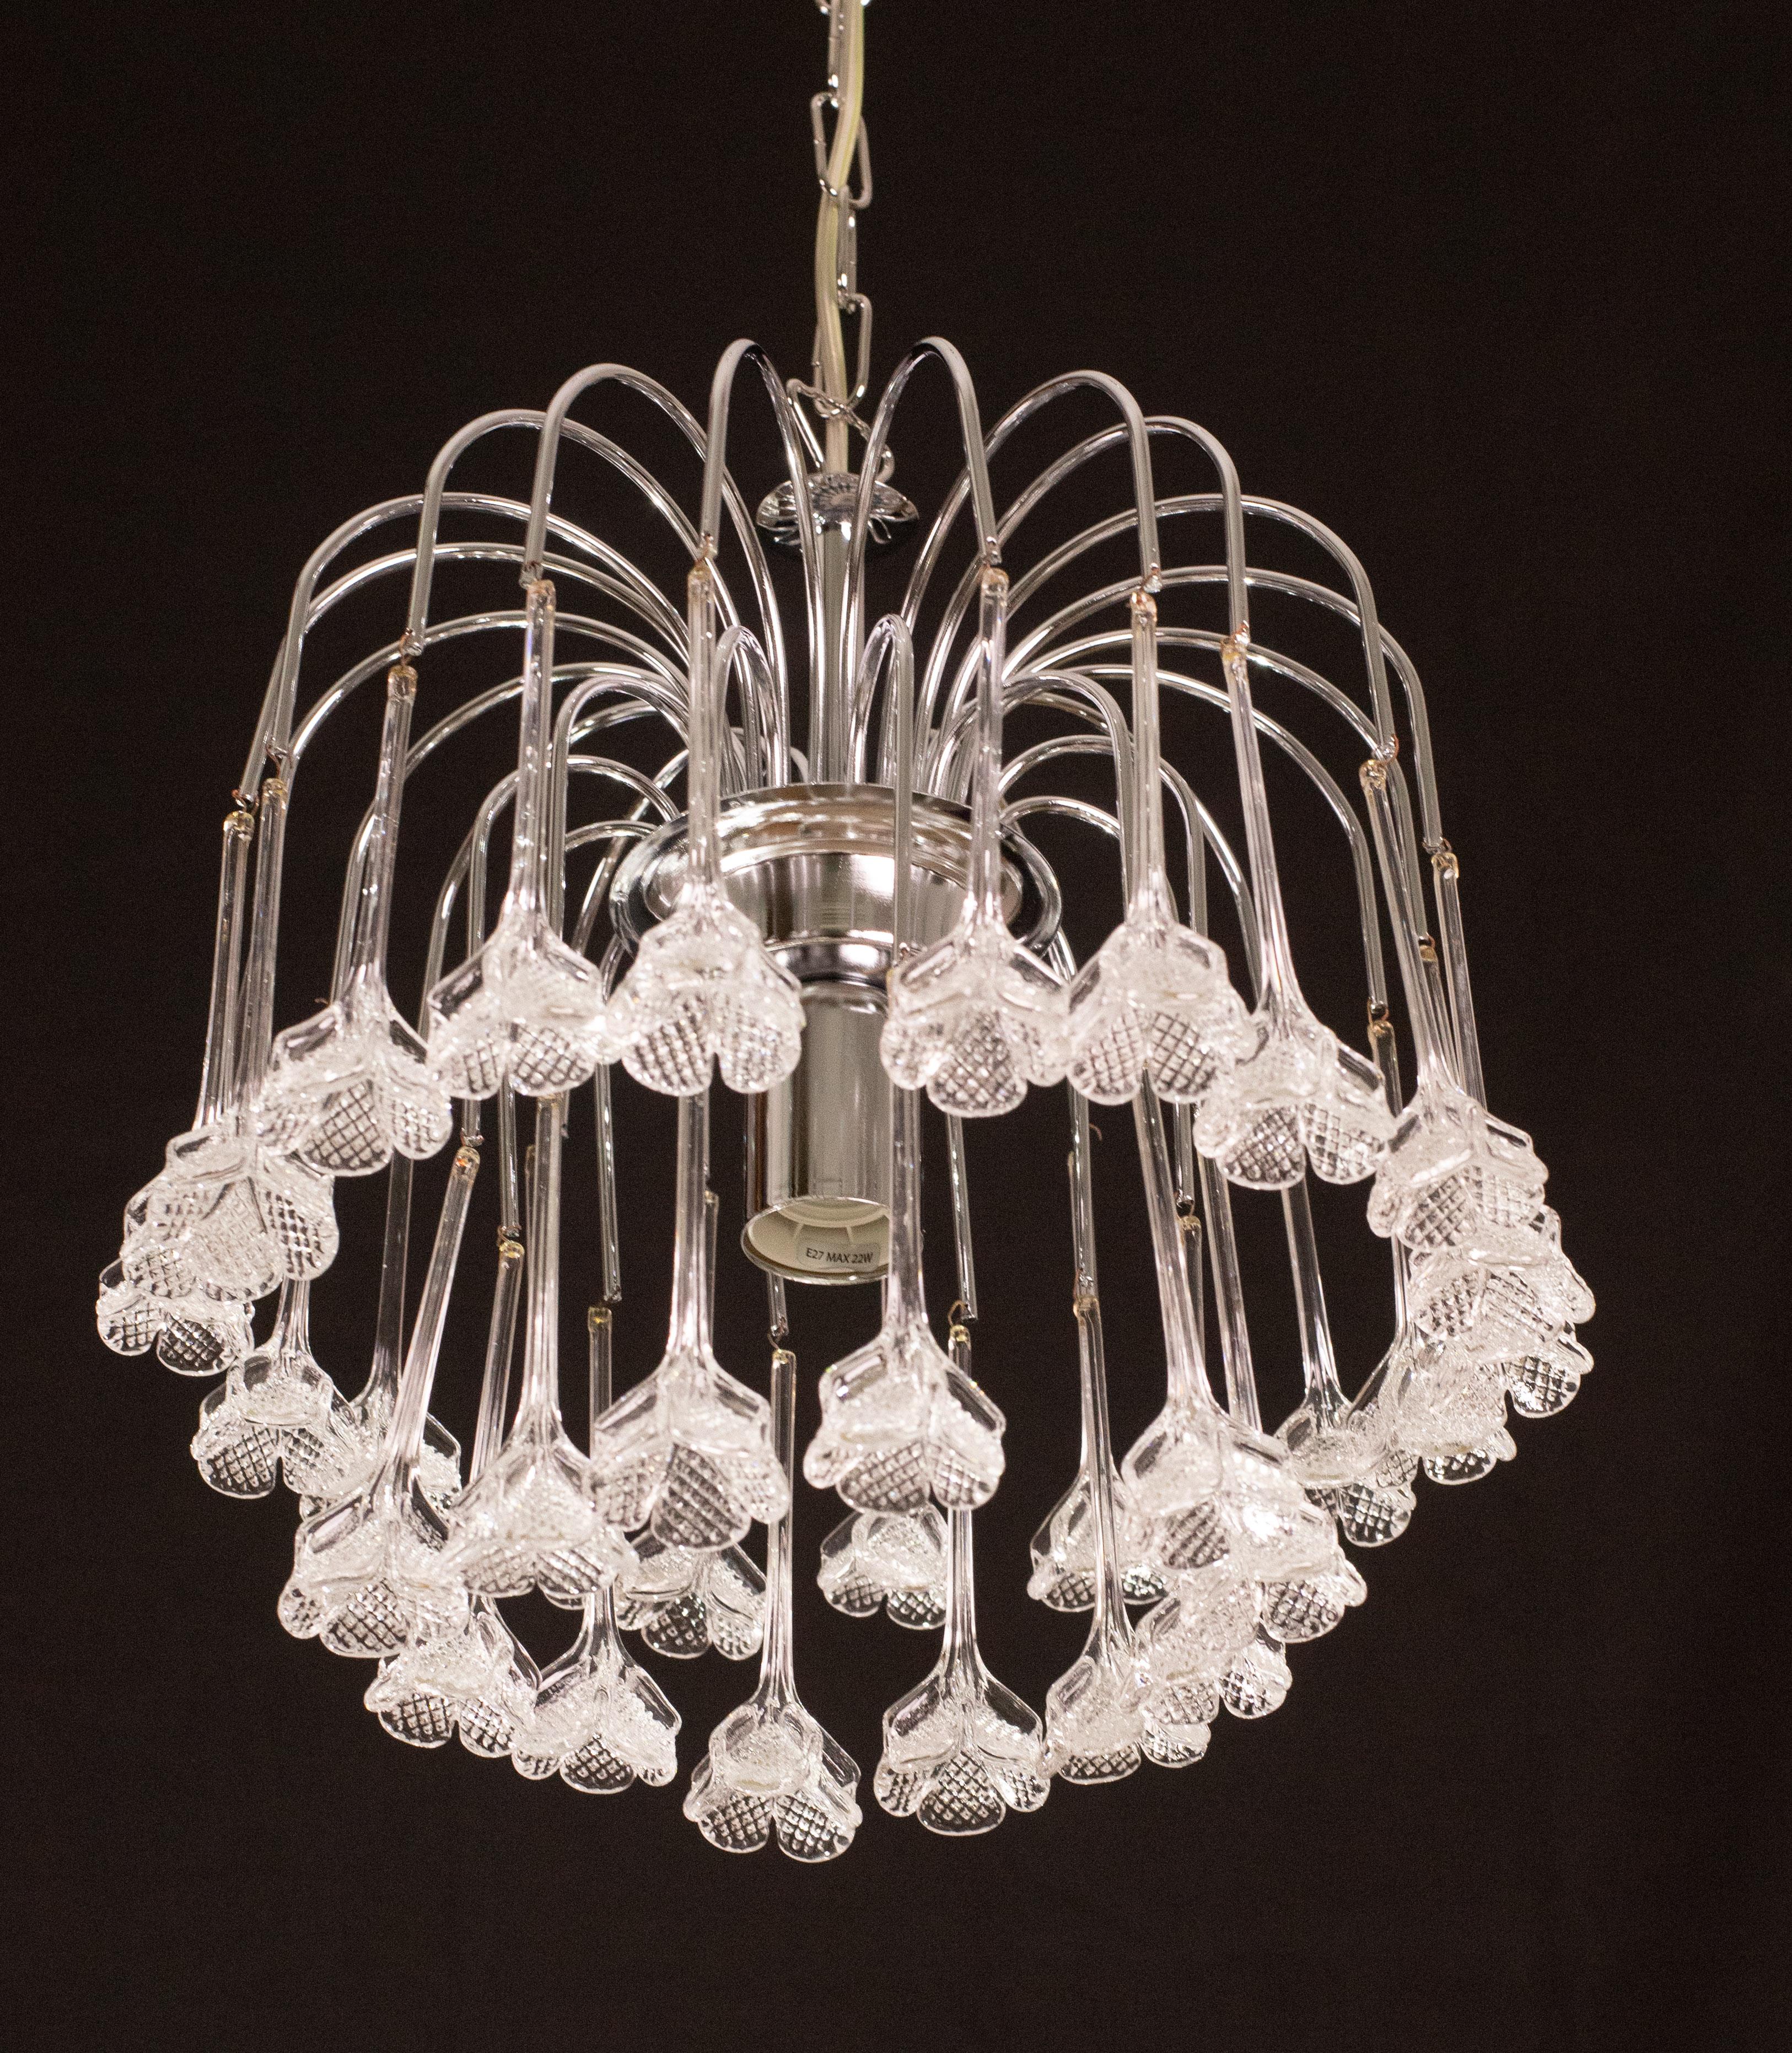 Set of 2 Julia Roberts, Vintage White Murano Chandelier, 1980s For Sale 6